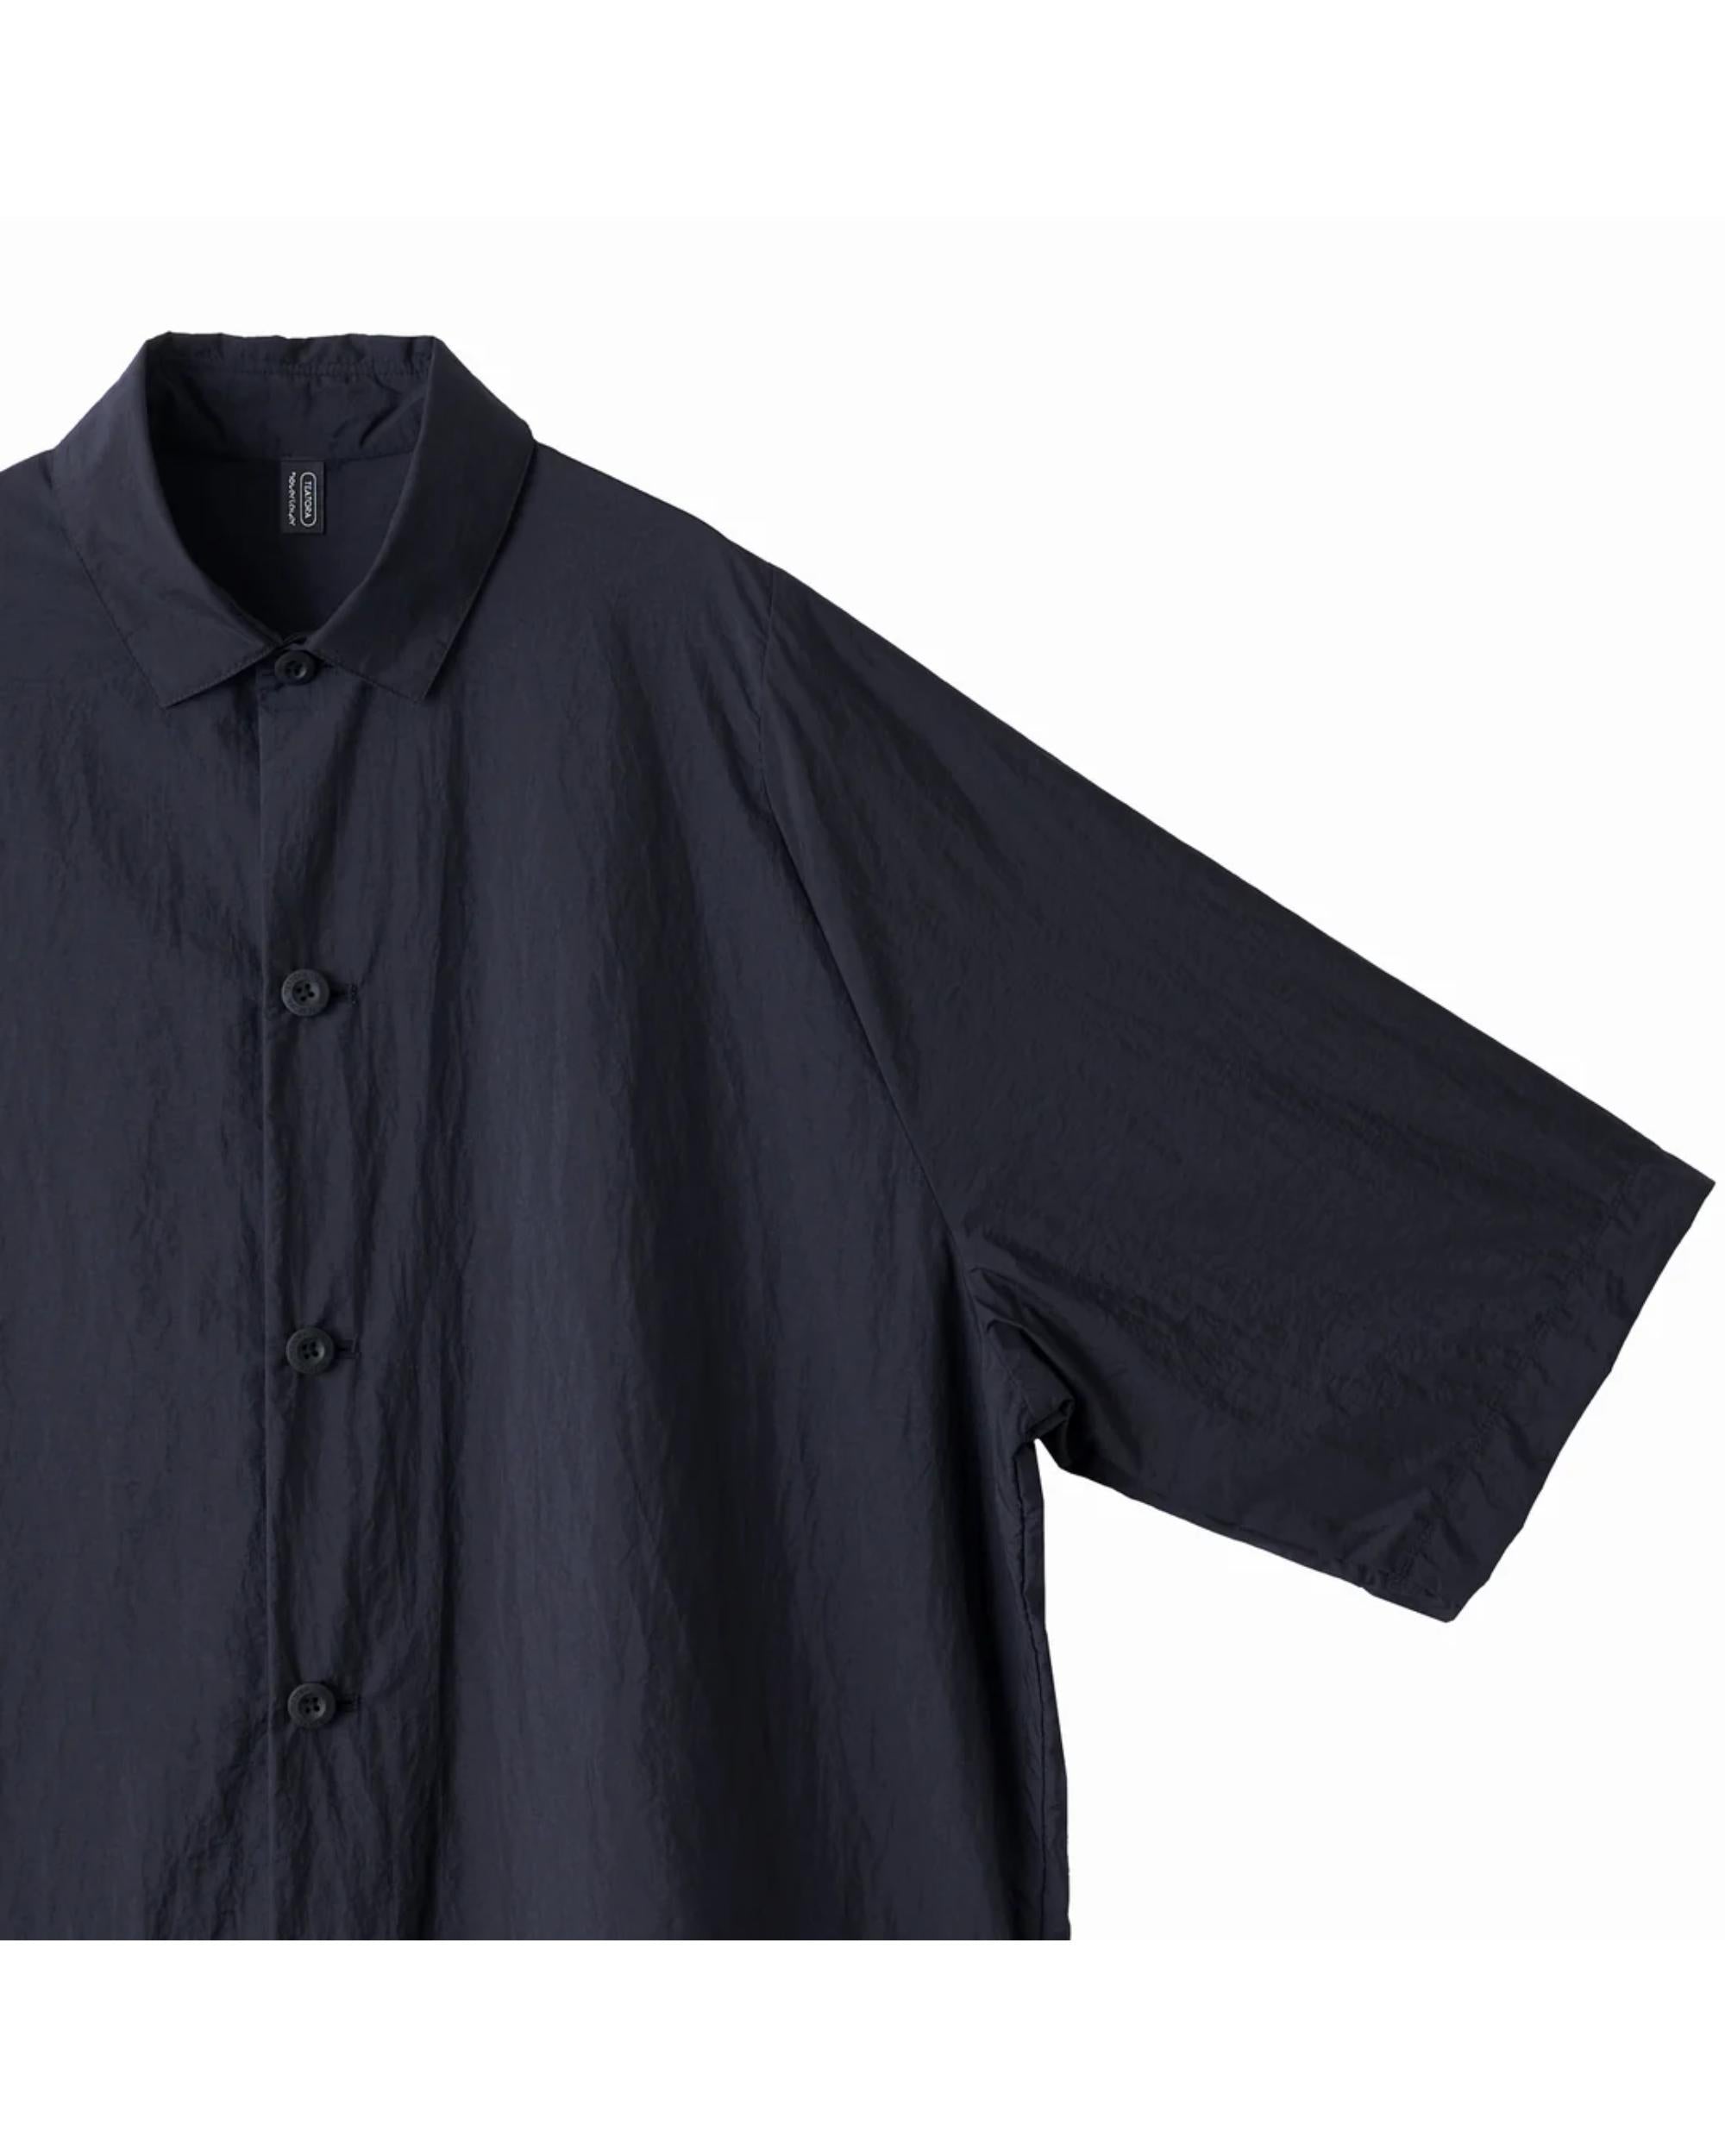 CARTRIDGE SHIRT S/S HL – TIME AFTER TIME